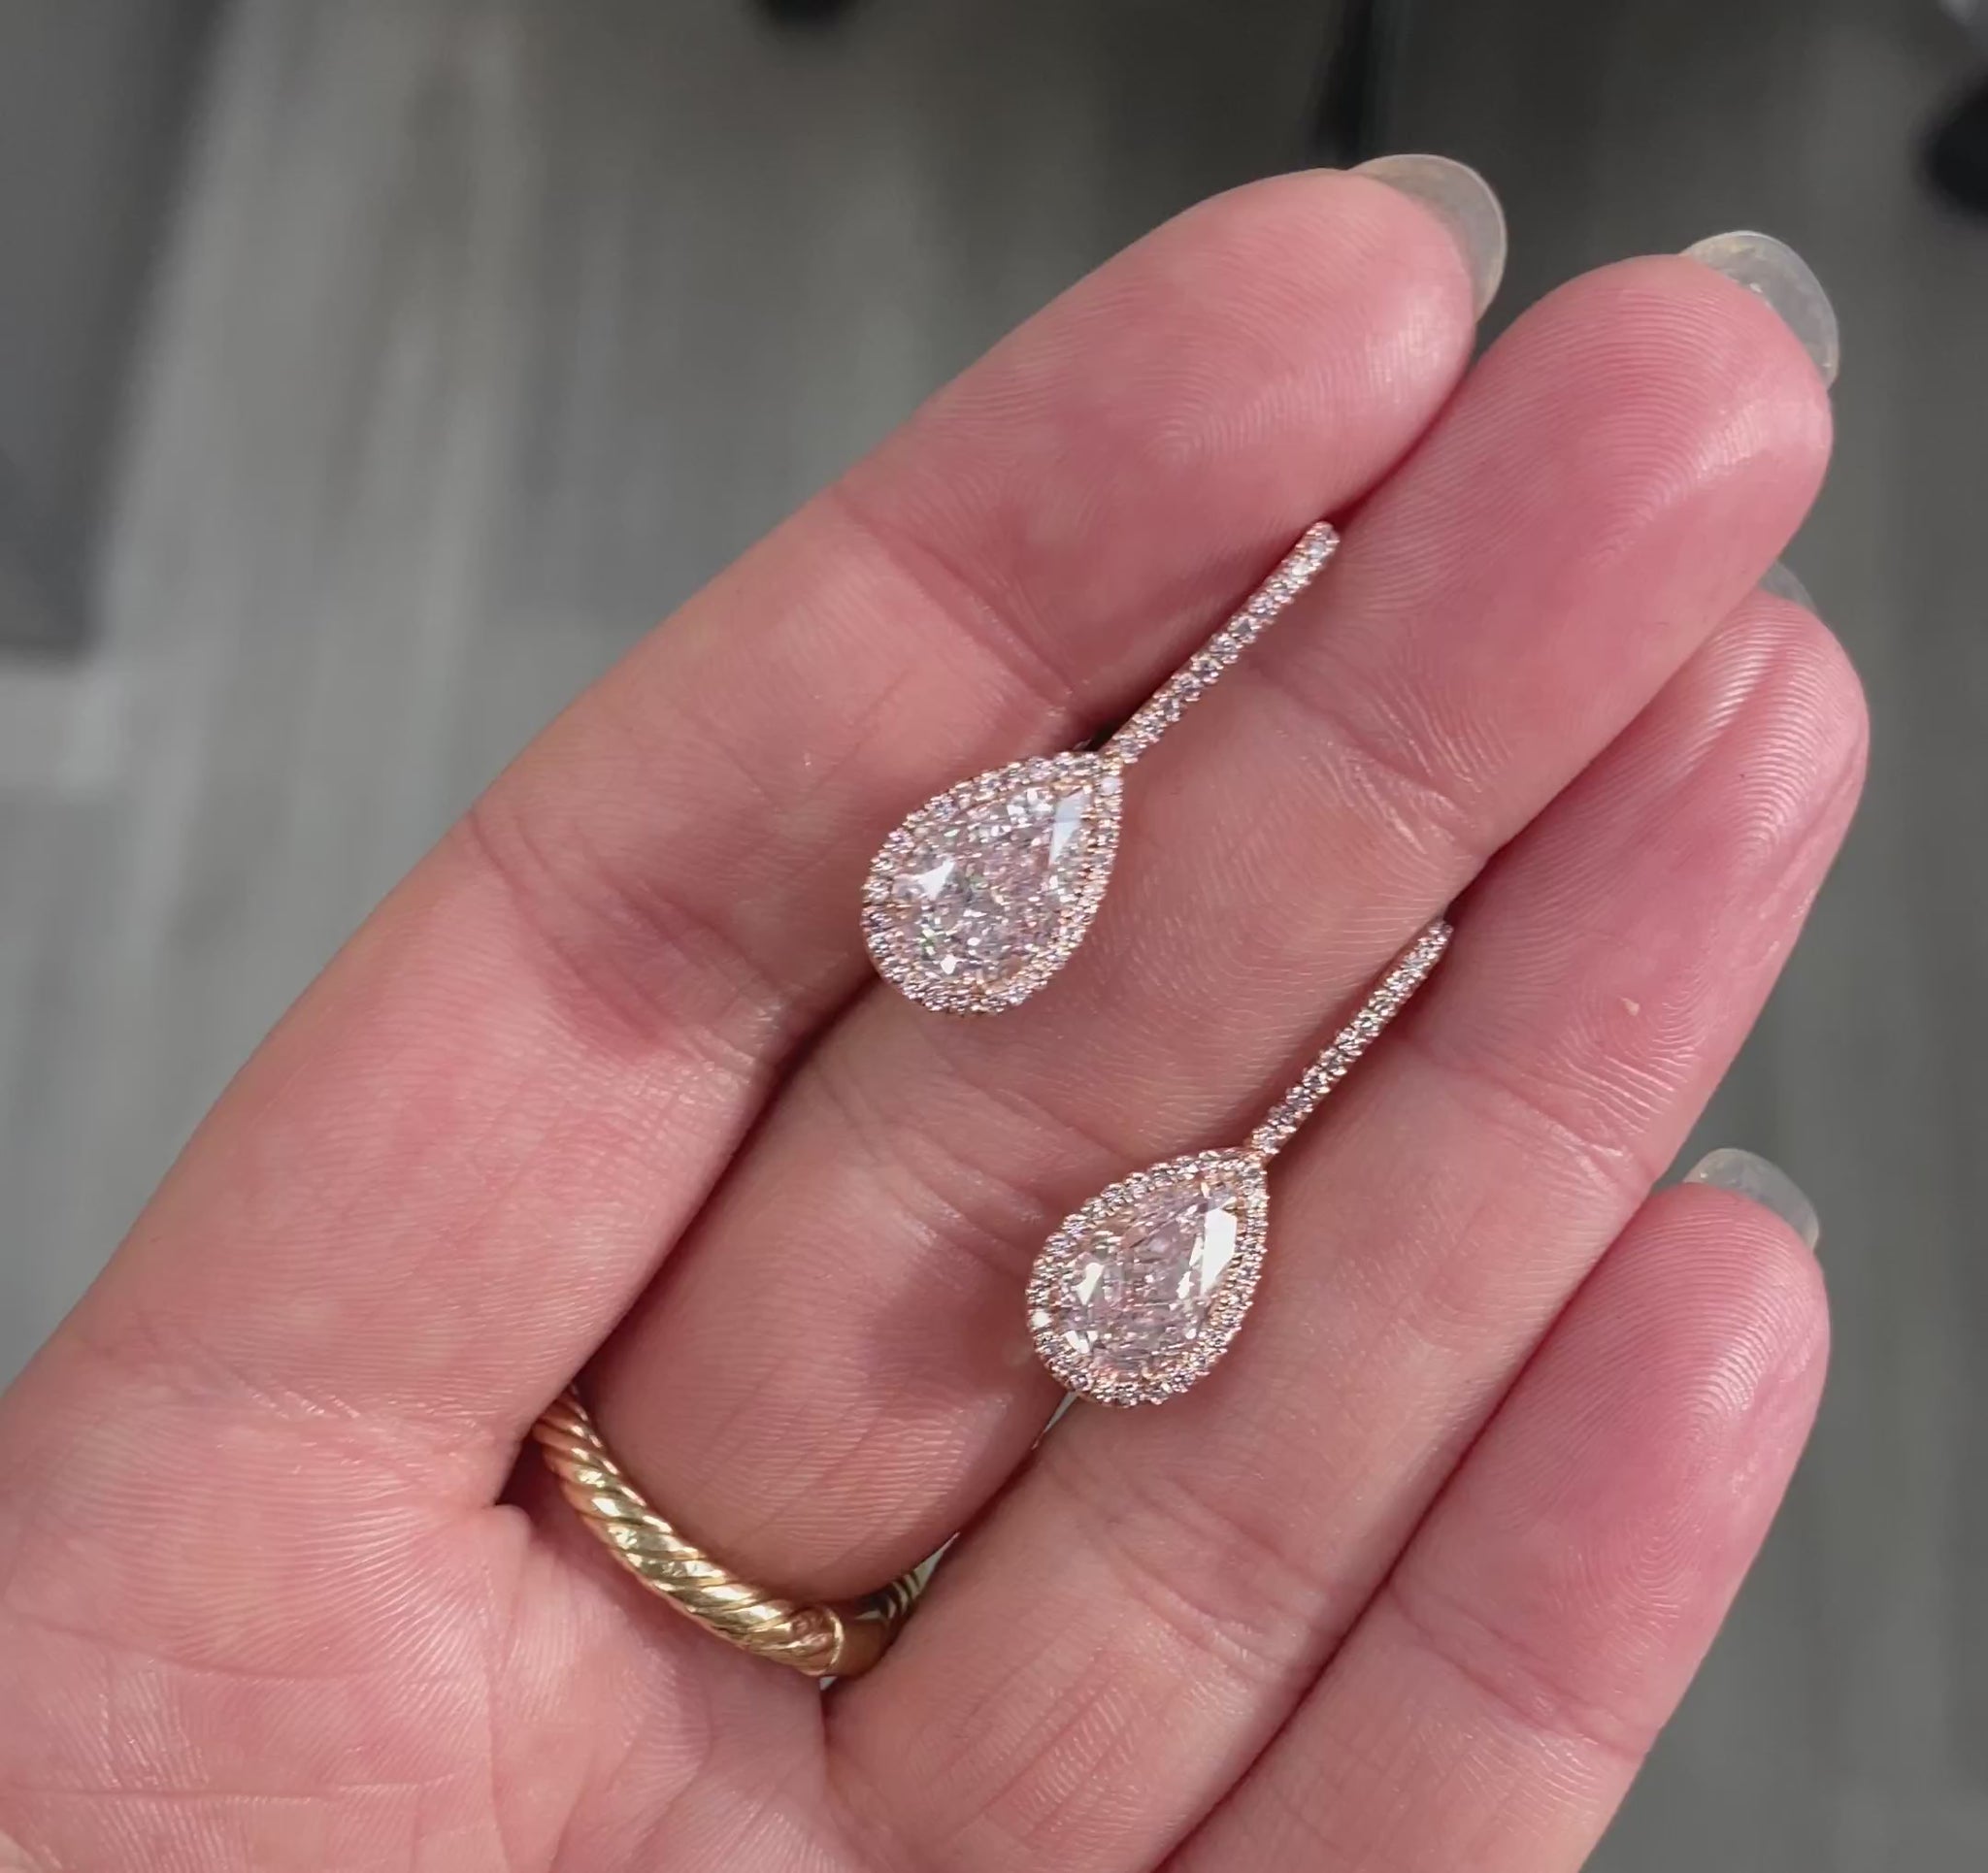 Handmade rose gold earrings featuring a rare matched pair of 2 carat each light pink pear shape diamonds and round pink diamonds